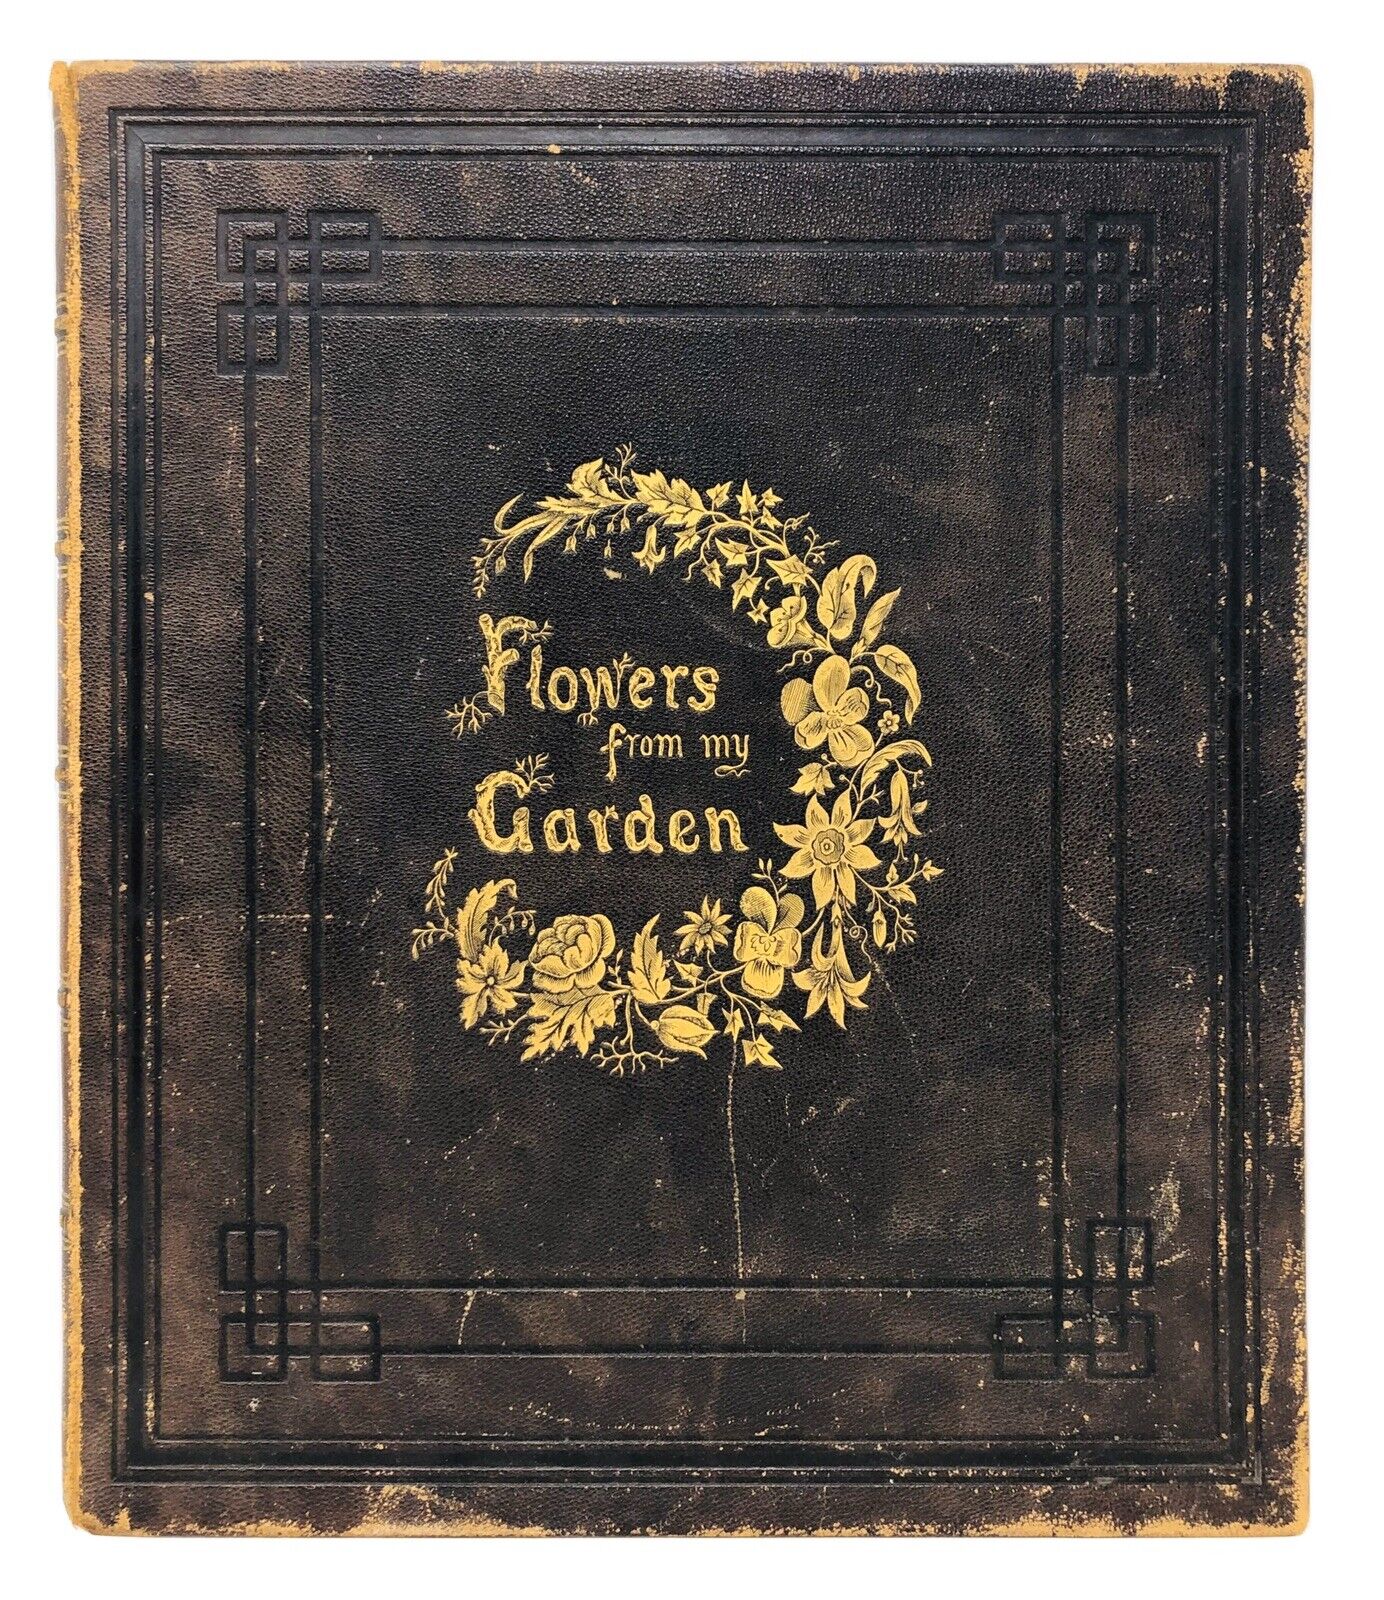 RARE 1864 Flowers From My Garden by Laura Gordon Munson Poems Sketches Sigourney